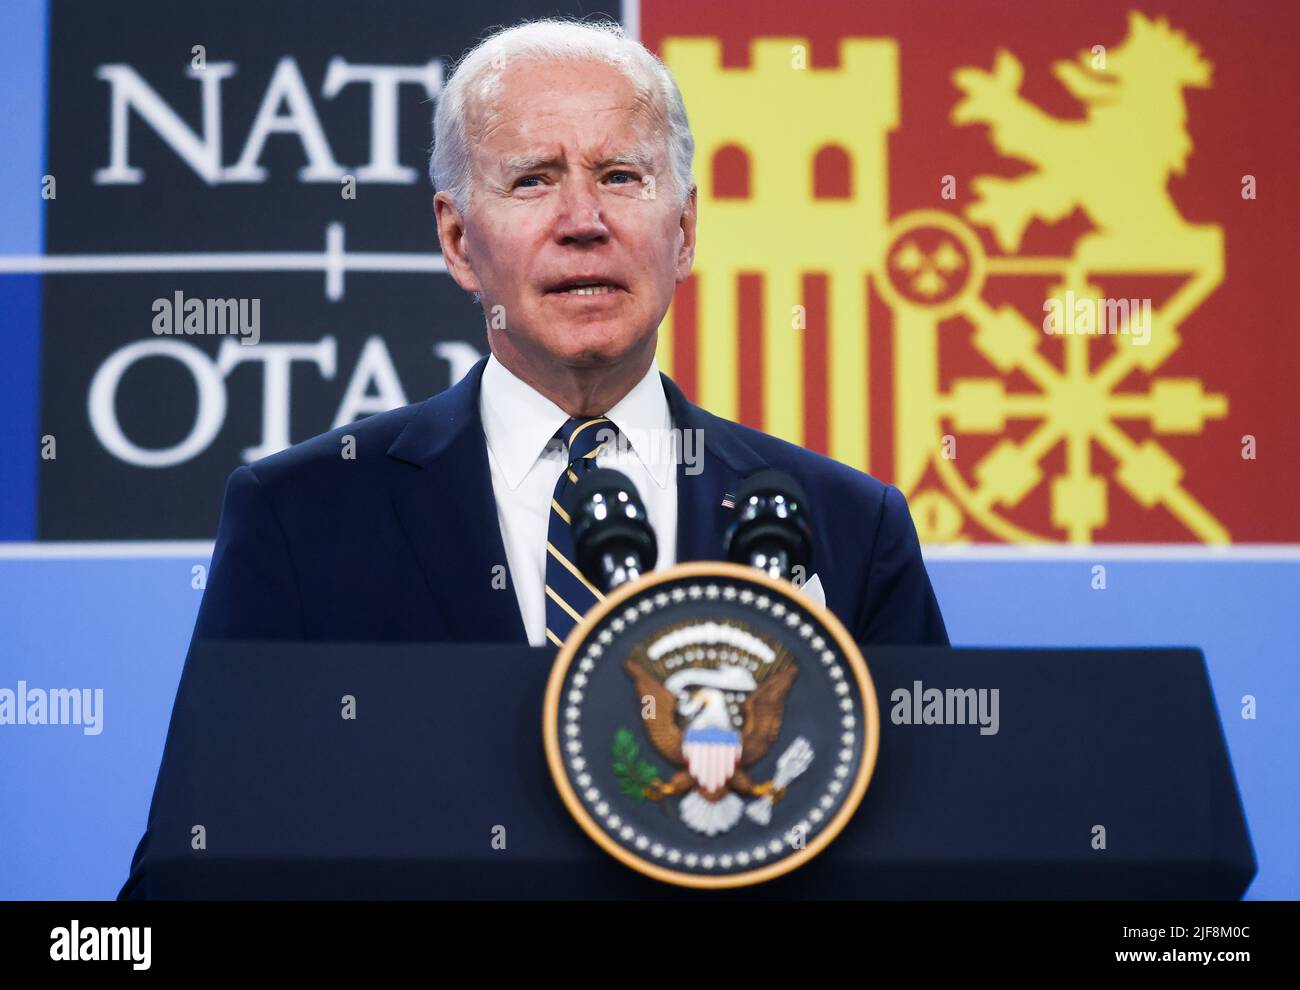 Madrid, Spain. 30th June, 2022. U.S. President Joe Biden is holding a press conference during the NATO Summit at the IFEMA congress centre in Madrid, Spain on June 30, 2022. (Credit Image: © Beata Zawrzel/ZUMA Press Wire) Stock Photo